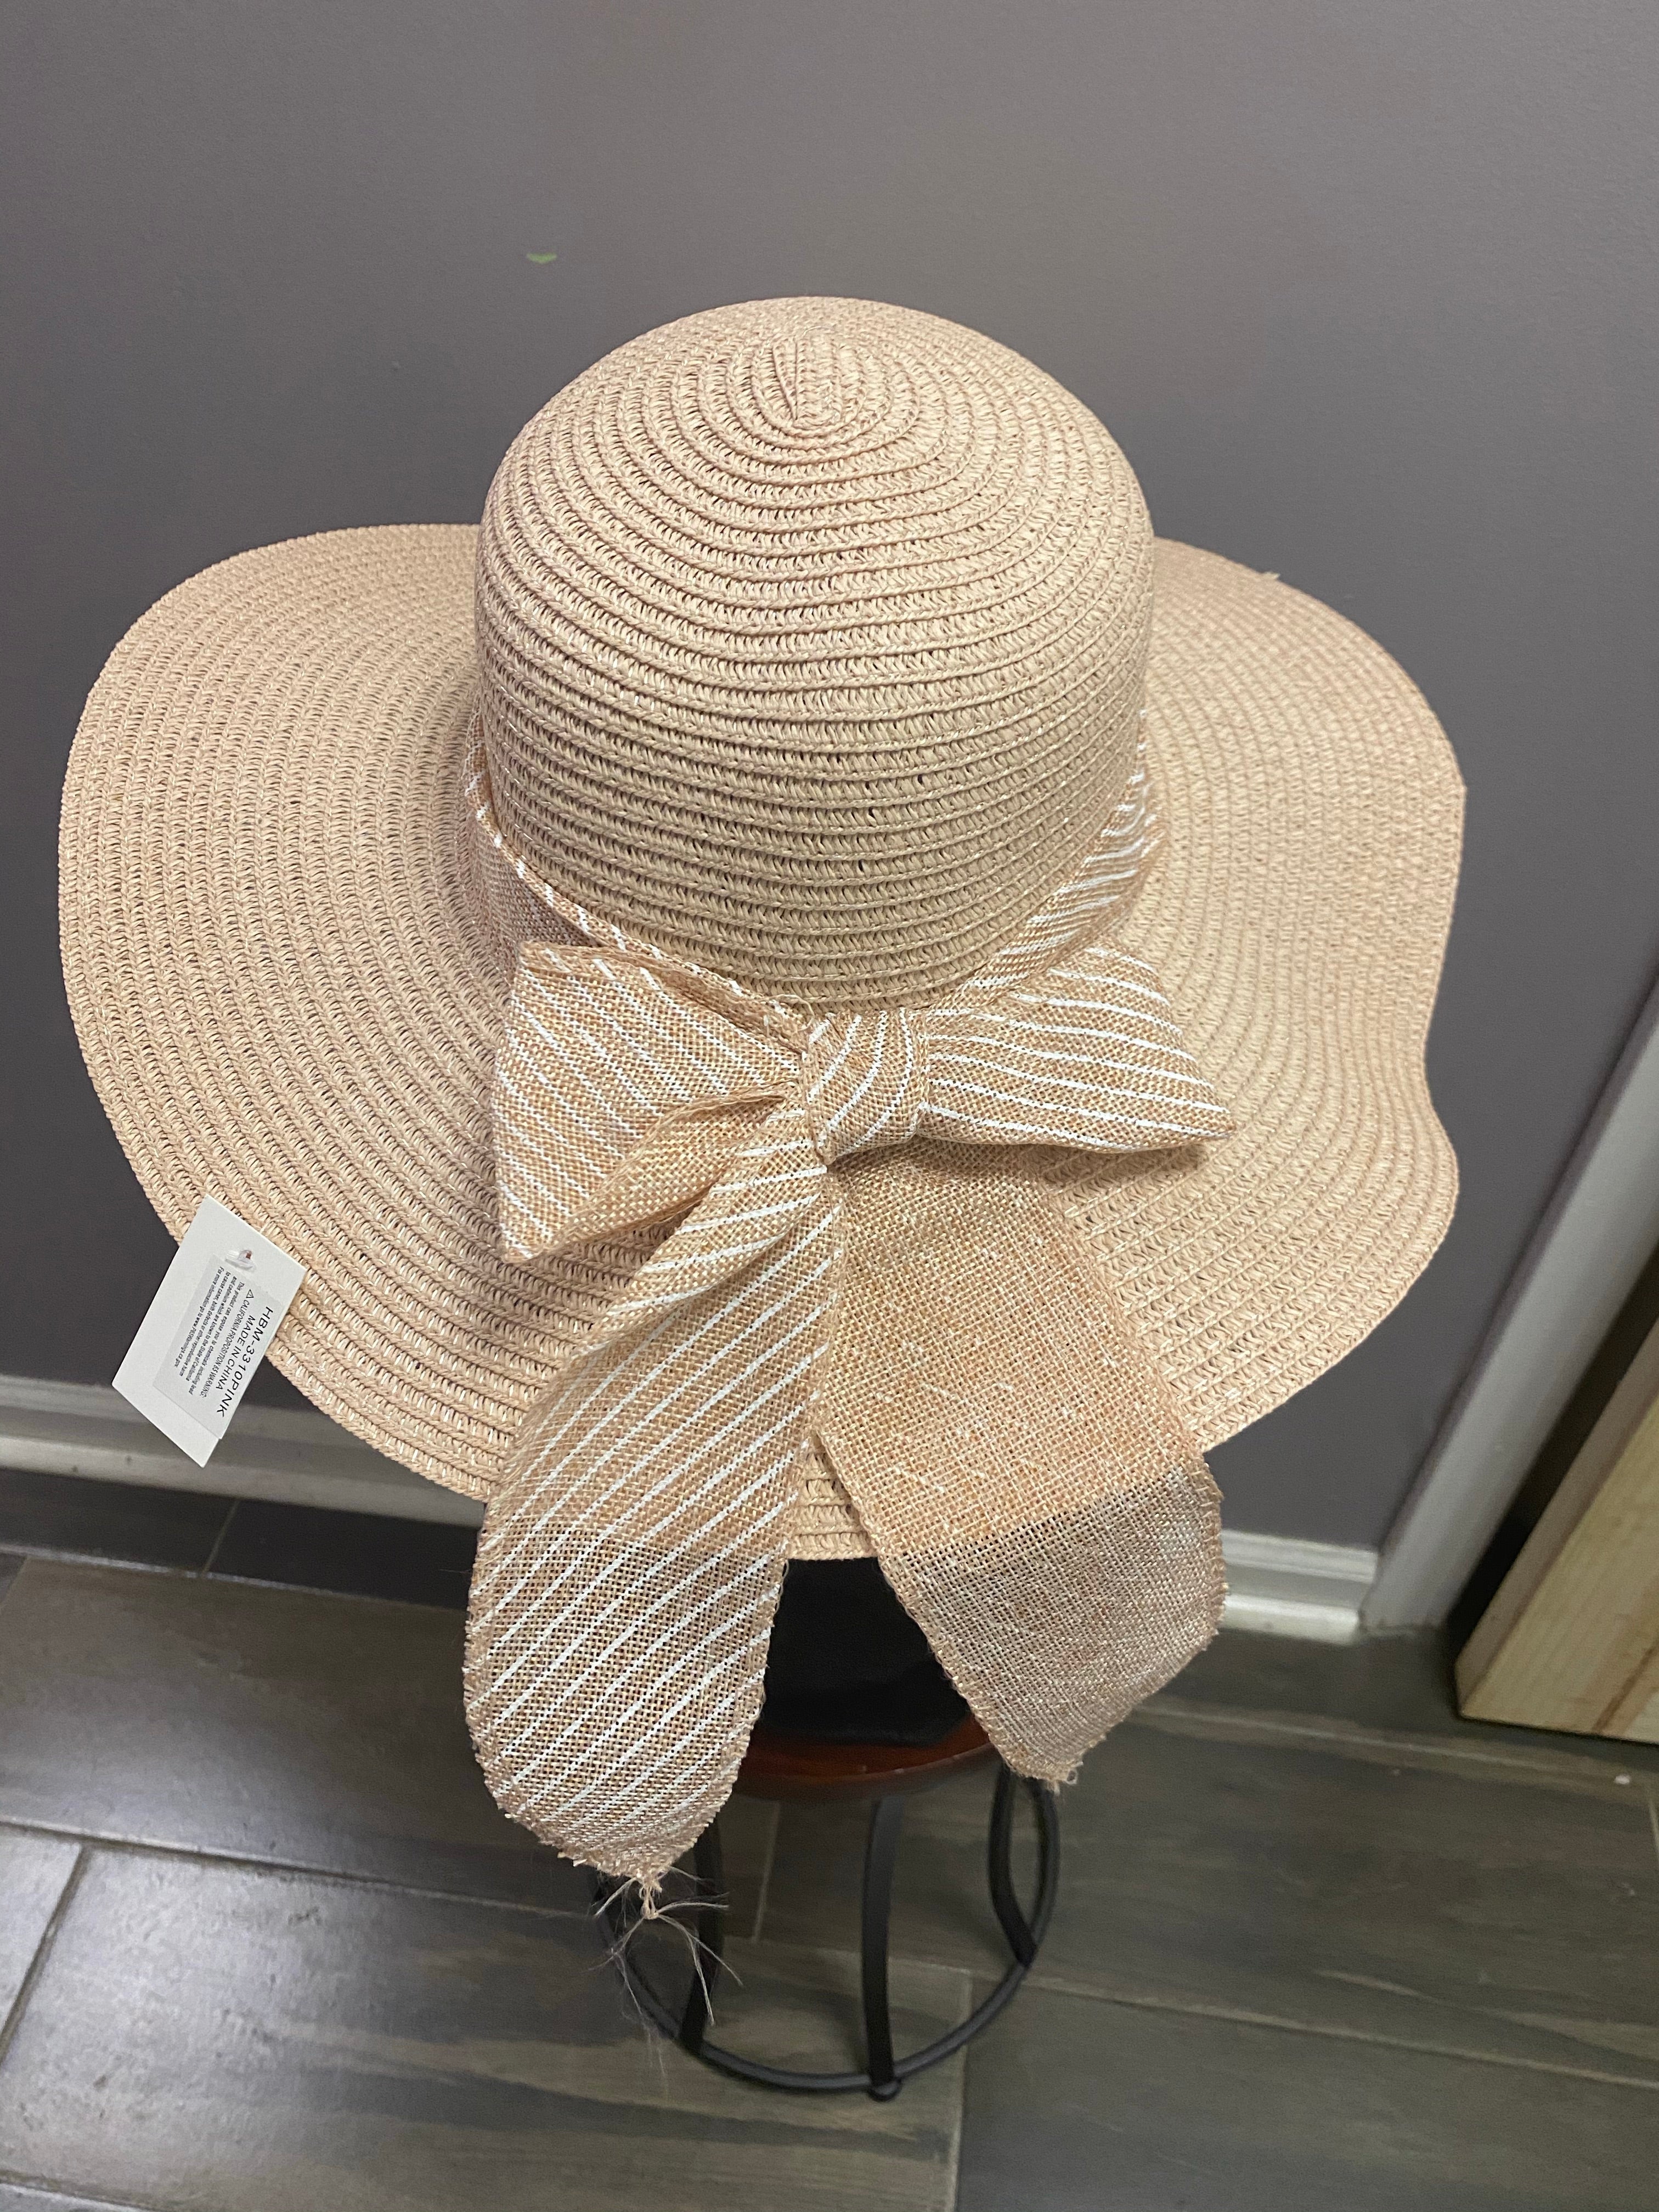 Southern Belle Straw Hat